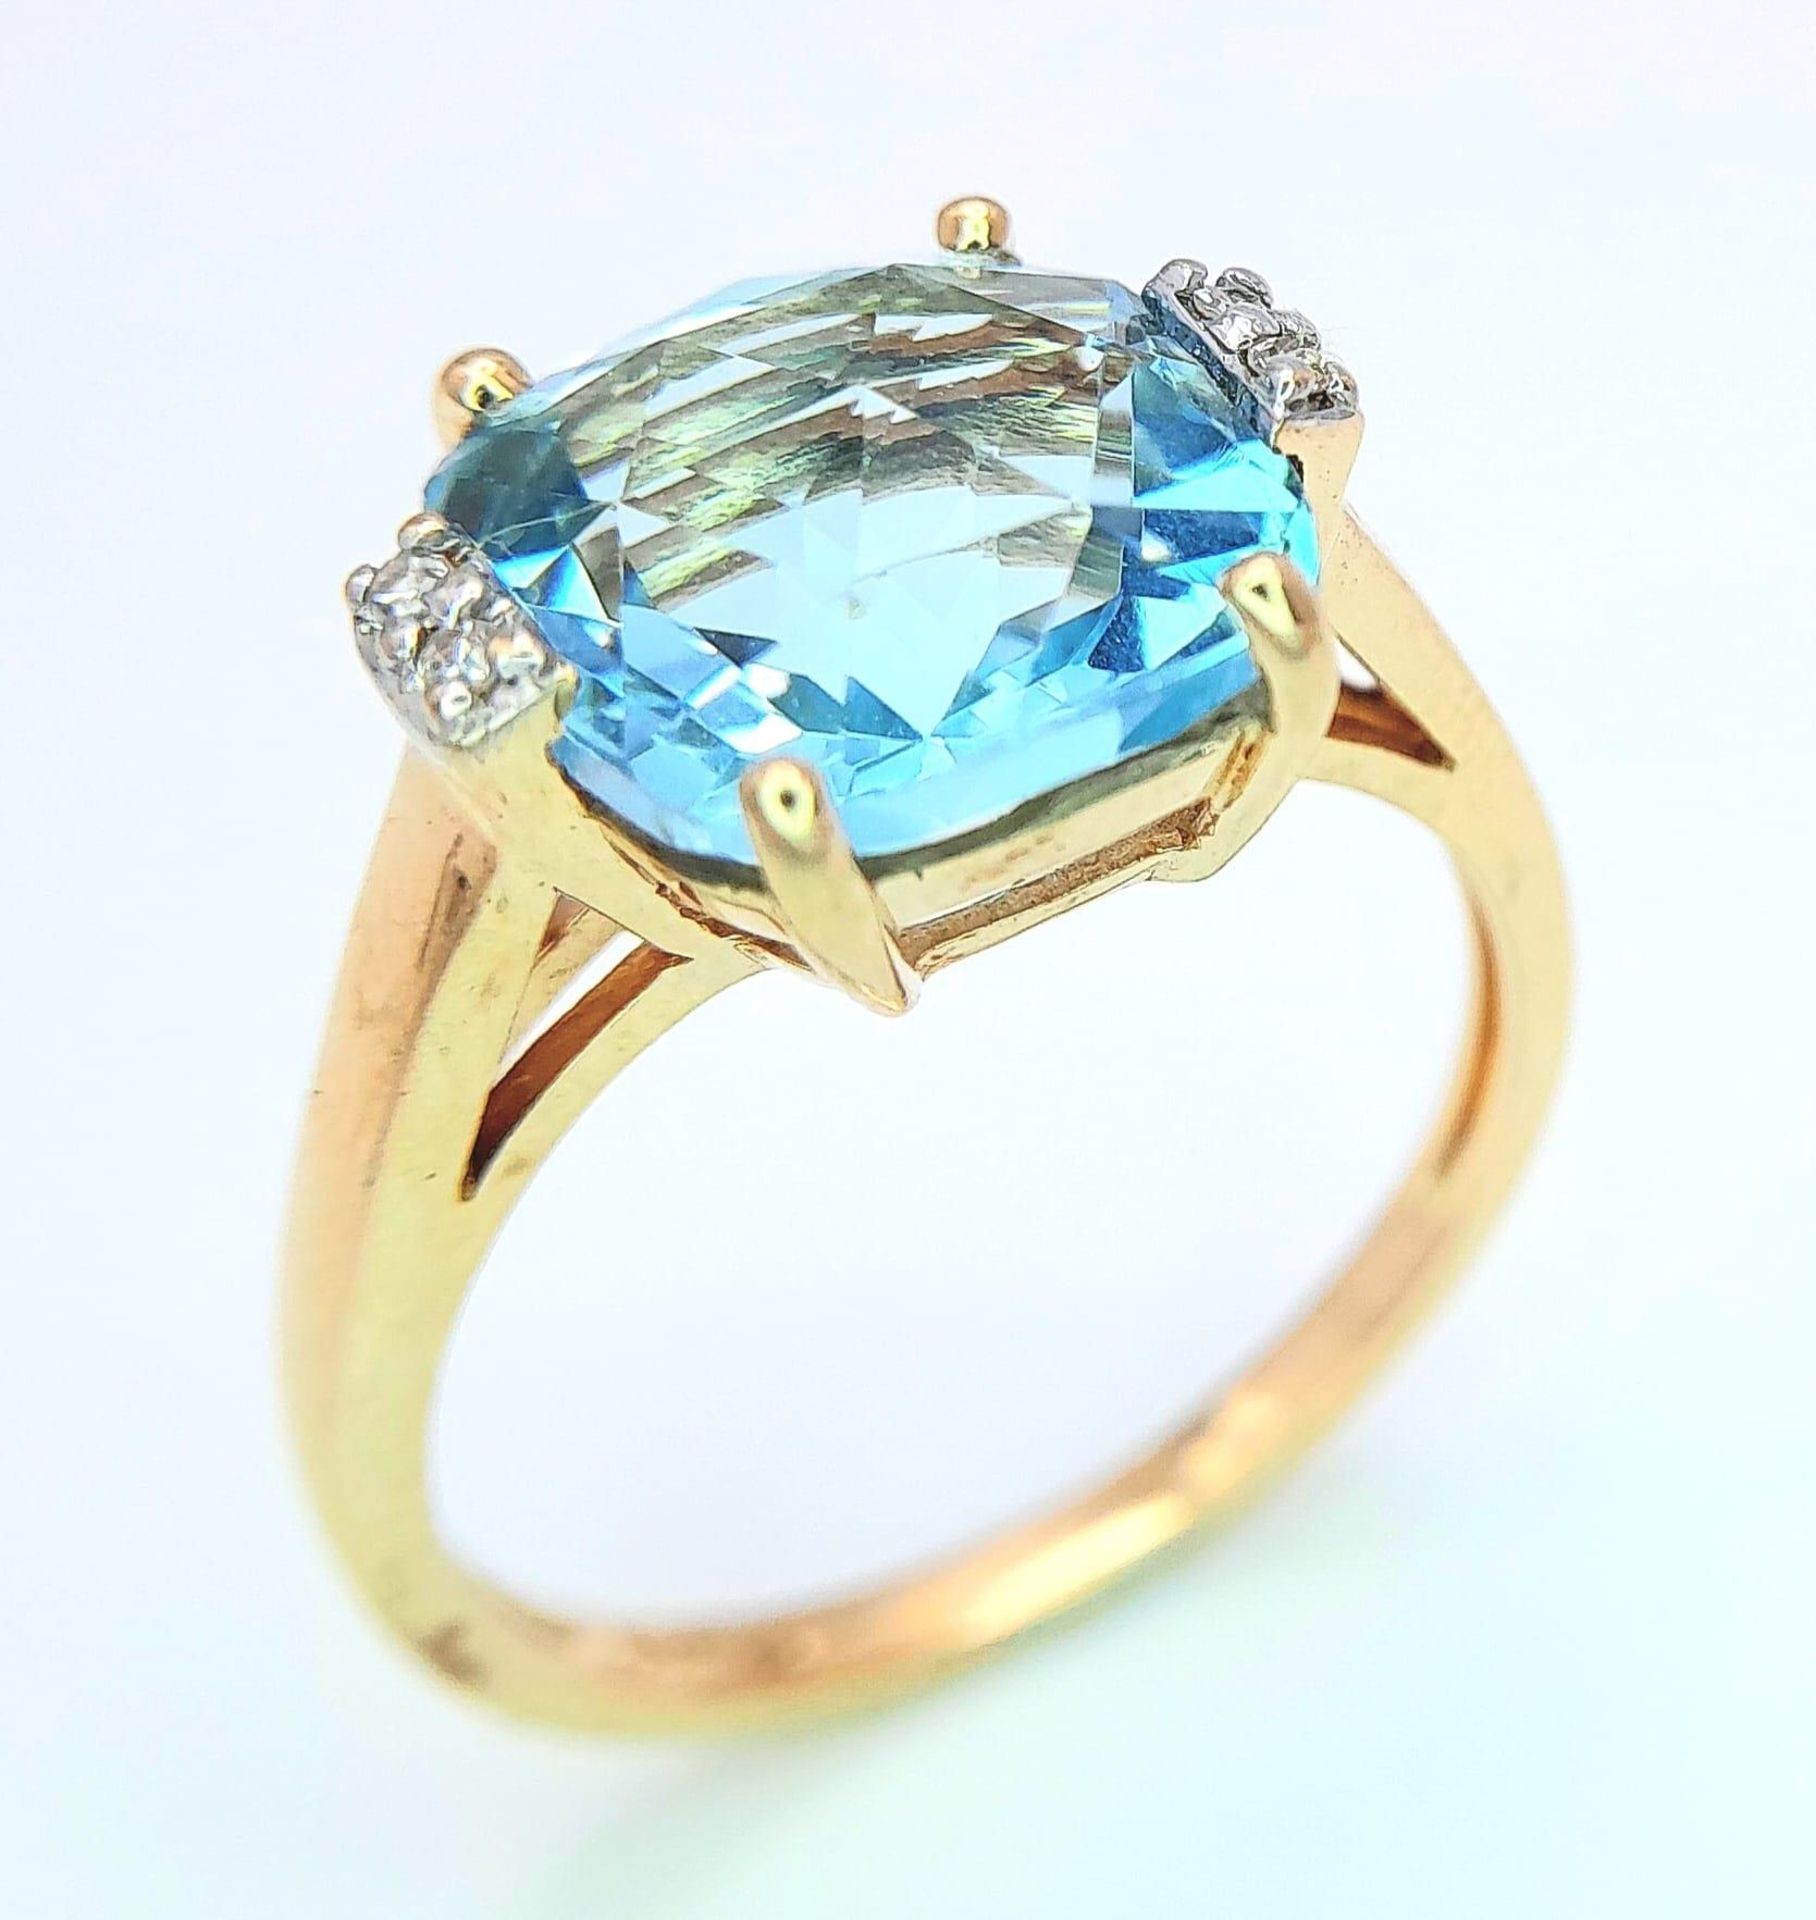 A very attractive 14 K yellow gold ring with a large, cushion cut aquamarine and a pair of - Image 8 of 14